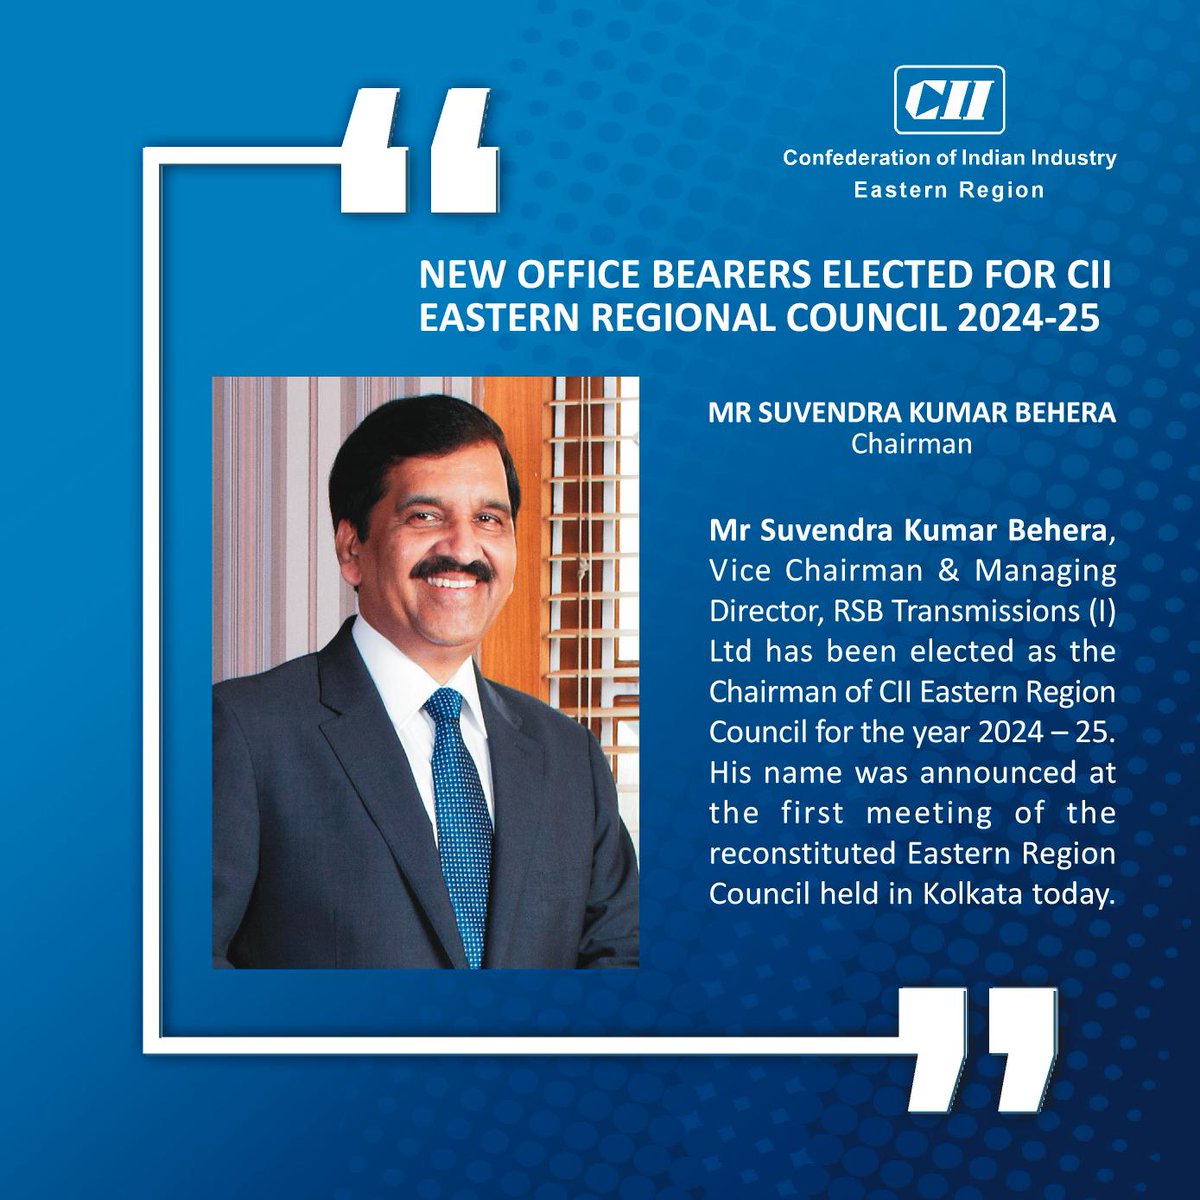 Mr Suvendra Kumar Behera, Vice Chairman & Managing Director, RSB Transmissions (I) Ltd has been elected as the #Chairman of CII #EasternRegionCouncil for the year 2024 – 25. His name was announced at the first meeting of the reconstituted Eastern Region Council held in Kolkata.